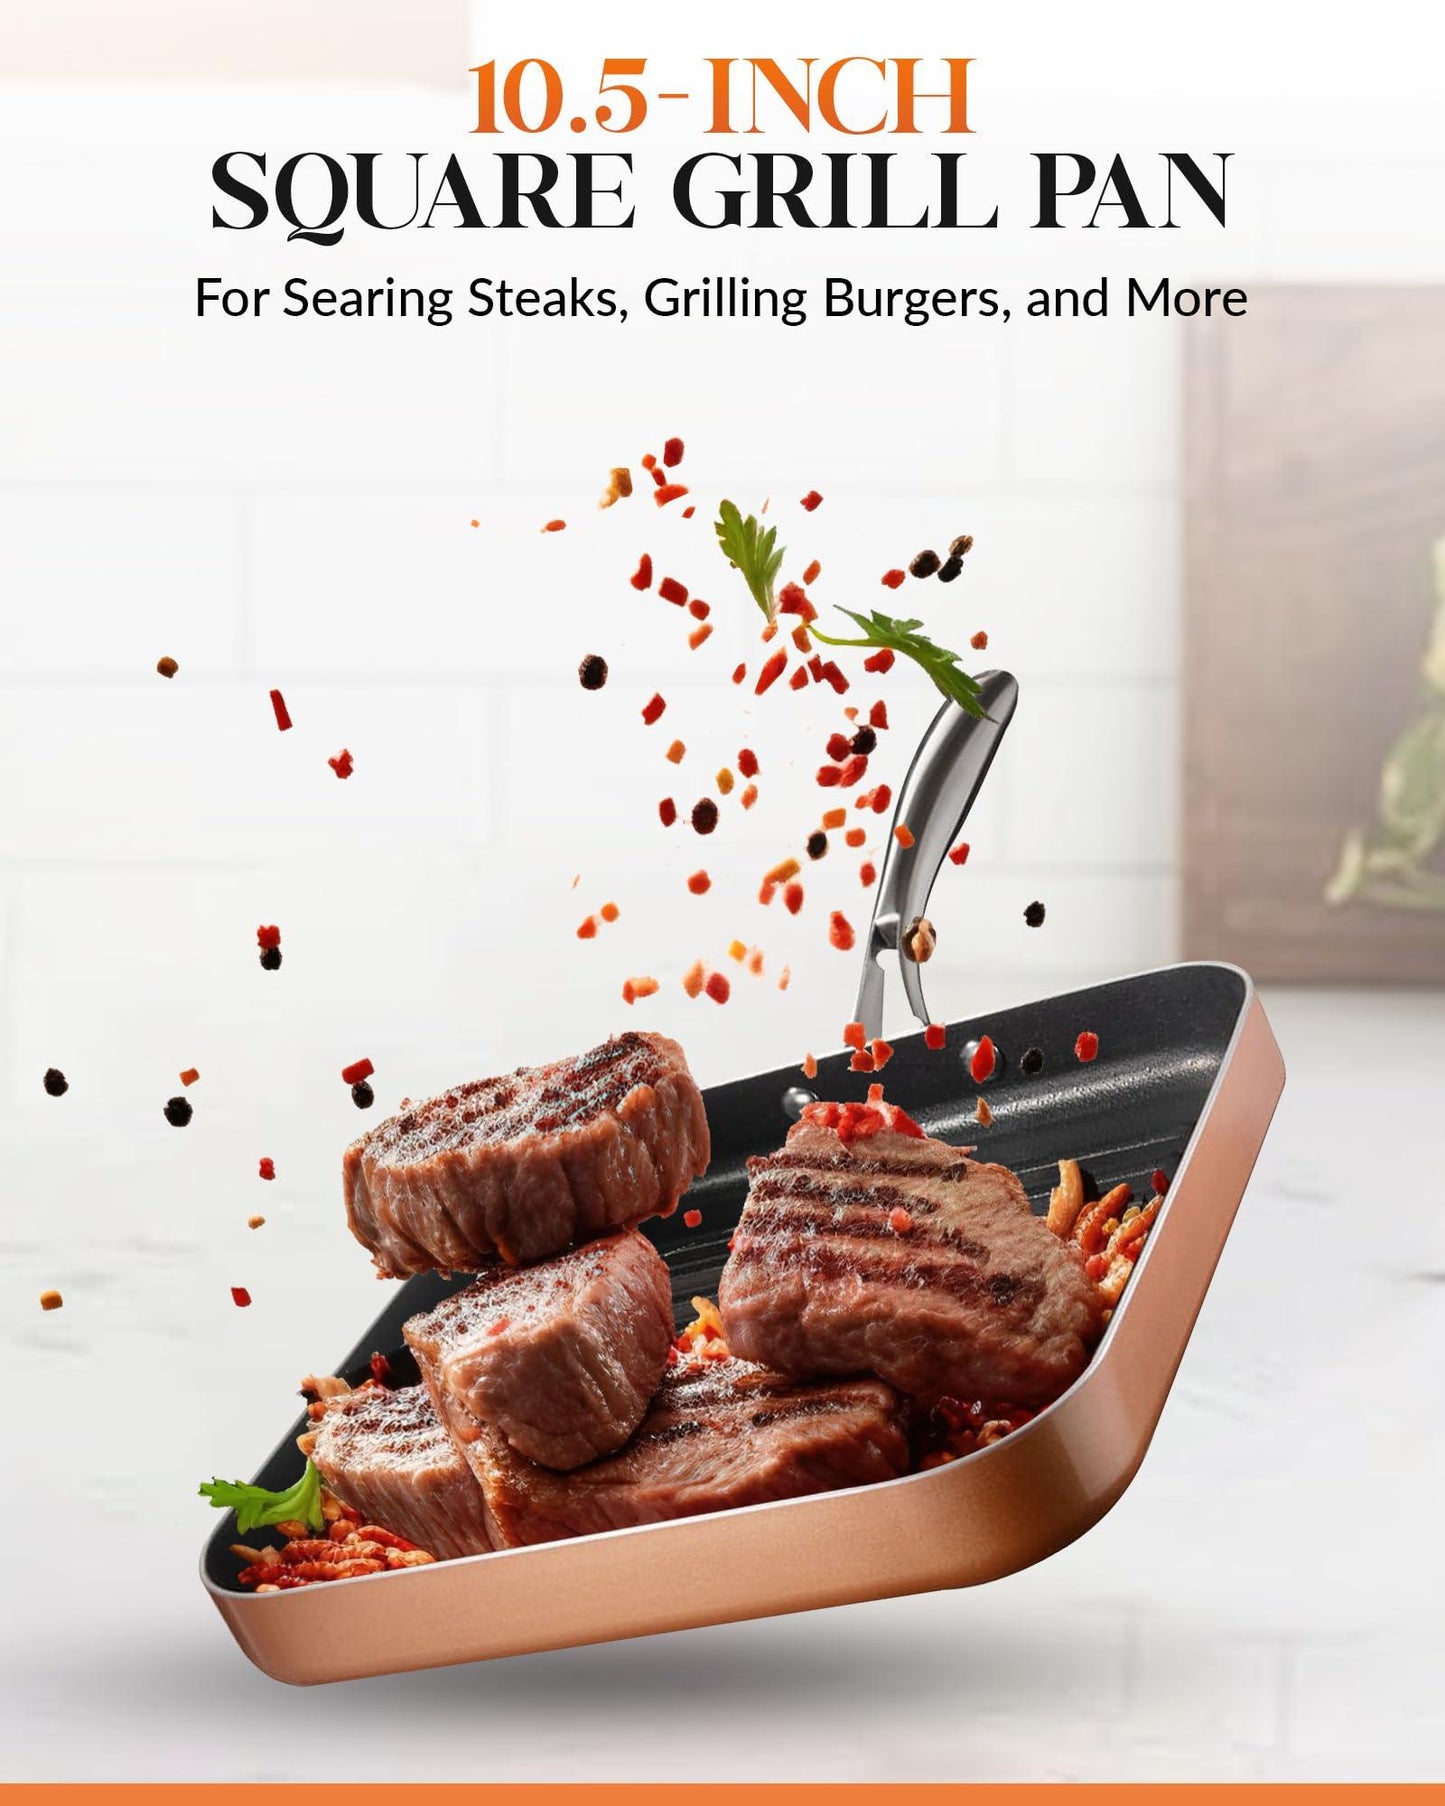 GOTHAM STEEL Nonstick Grill Pan for Stove Top with Grill Sear Ridges, Nonstick Ultra Durable Grilling Pan, Metal Utensil Safe, Stay Cool Stainless-Steel Handle, Oven & Dishwasher Safe, Non-Toxic - CookCave